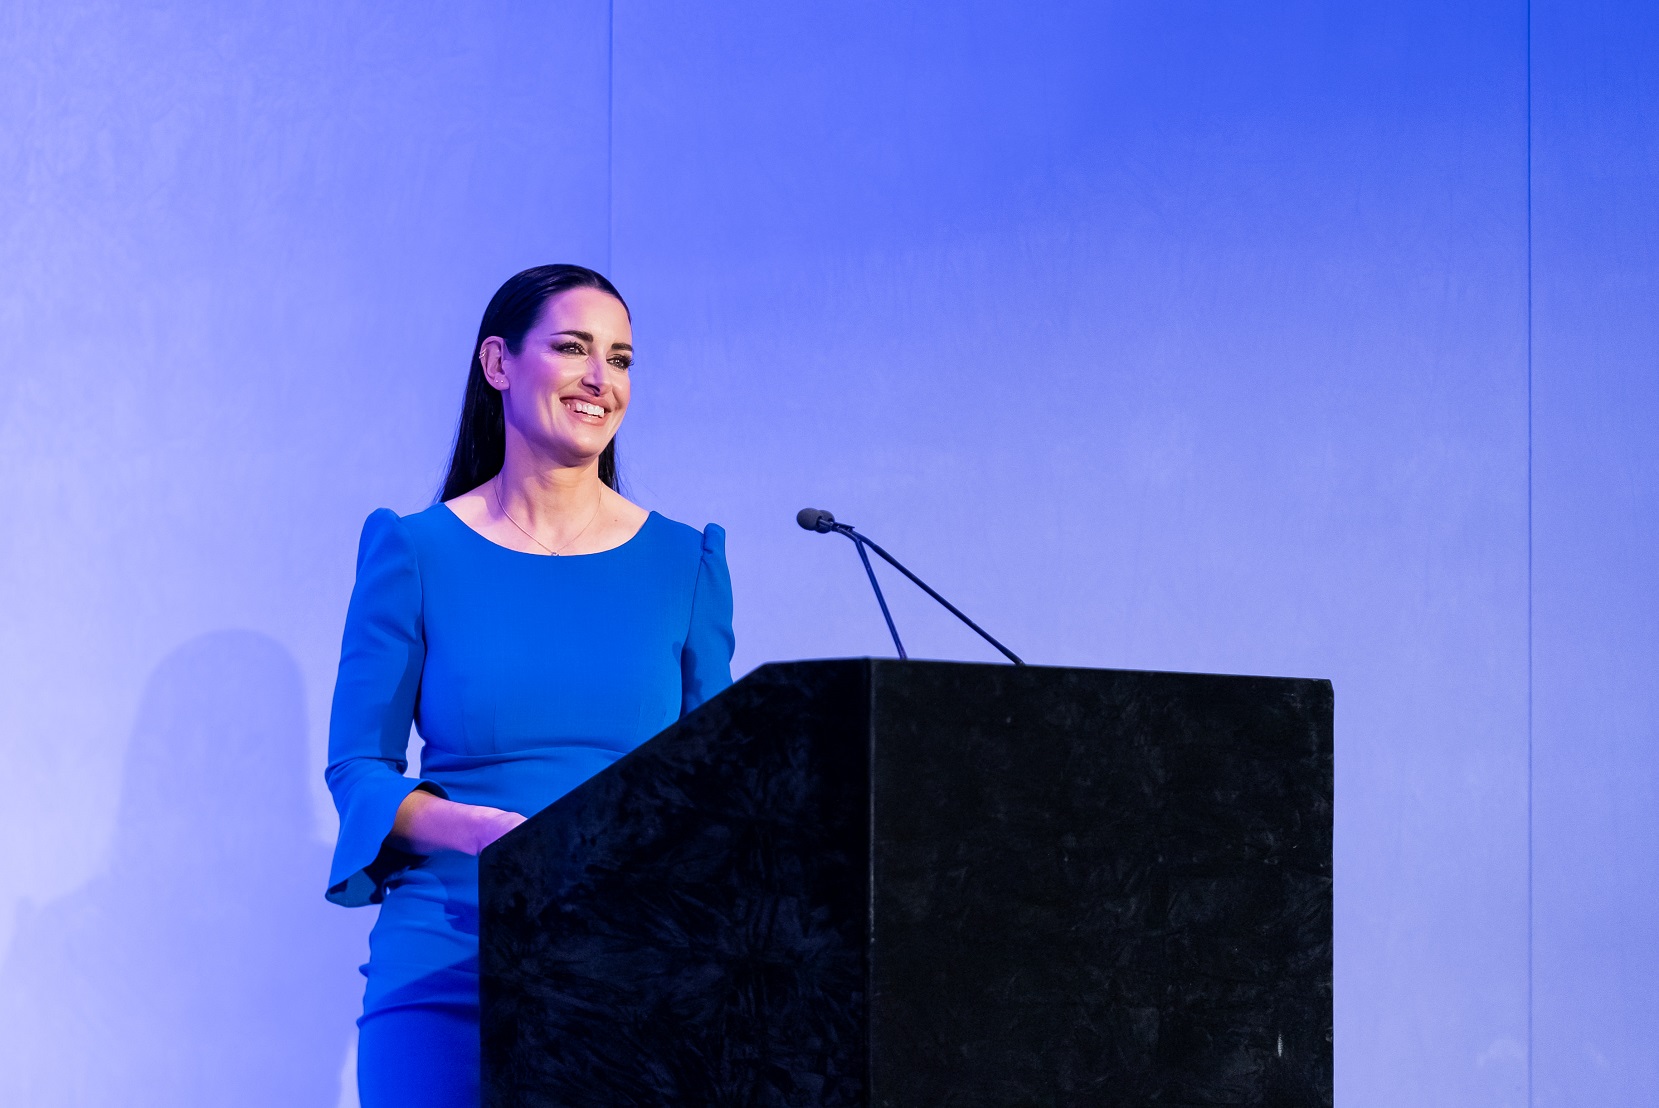 Kirsty Gallacher presented our proud Guild Members with their awards